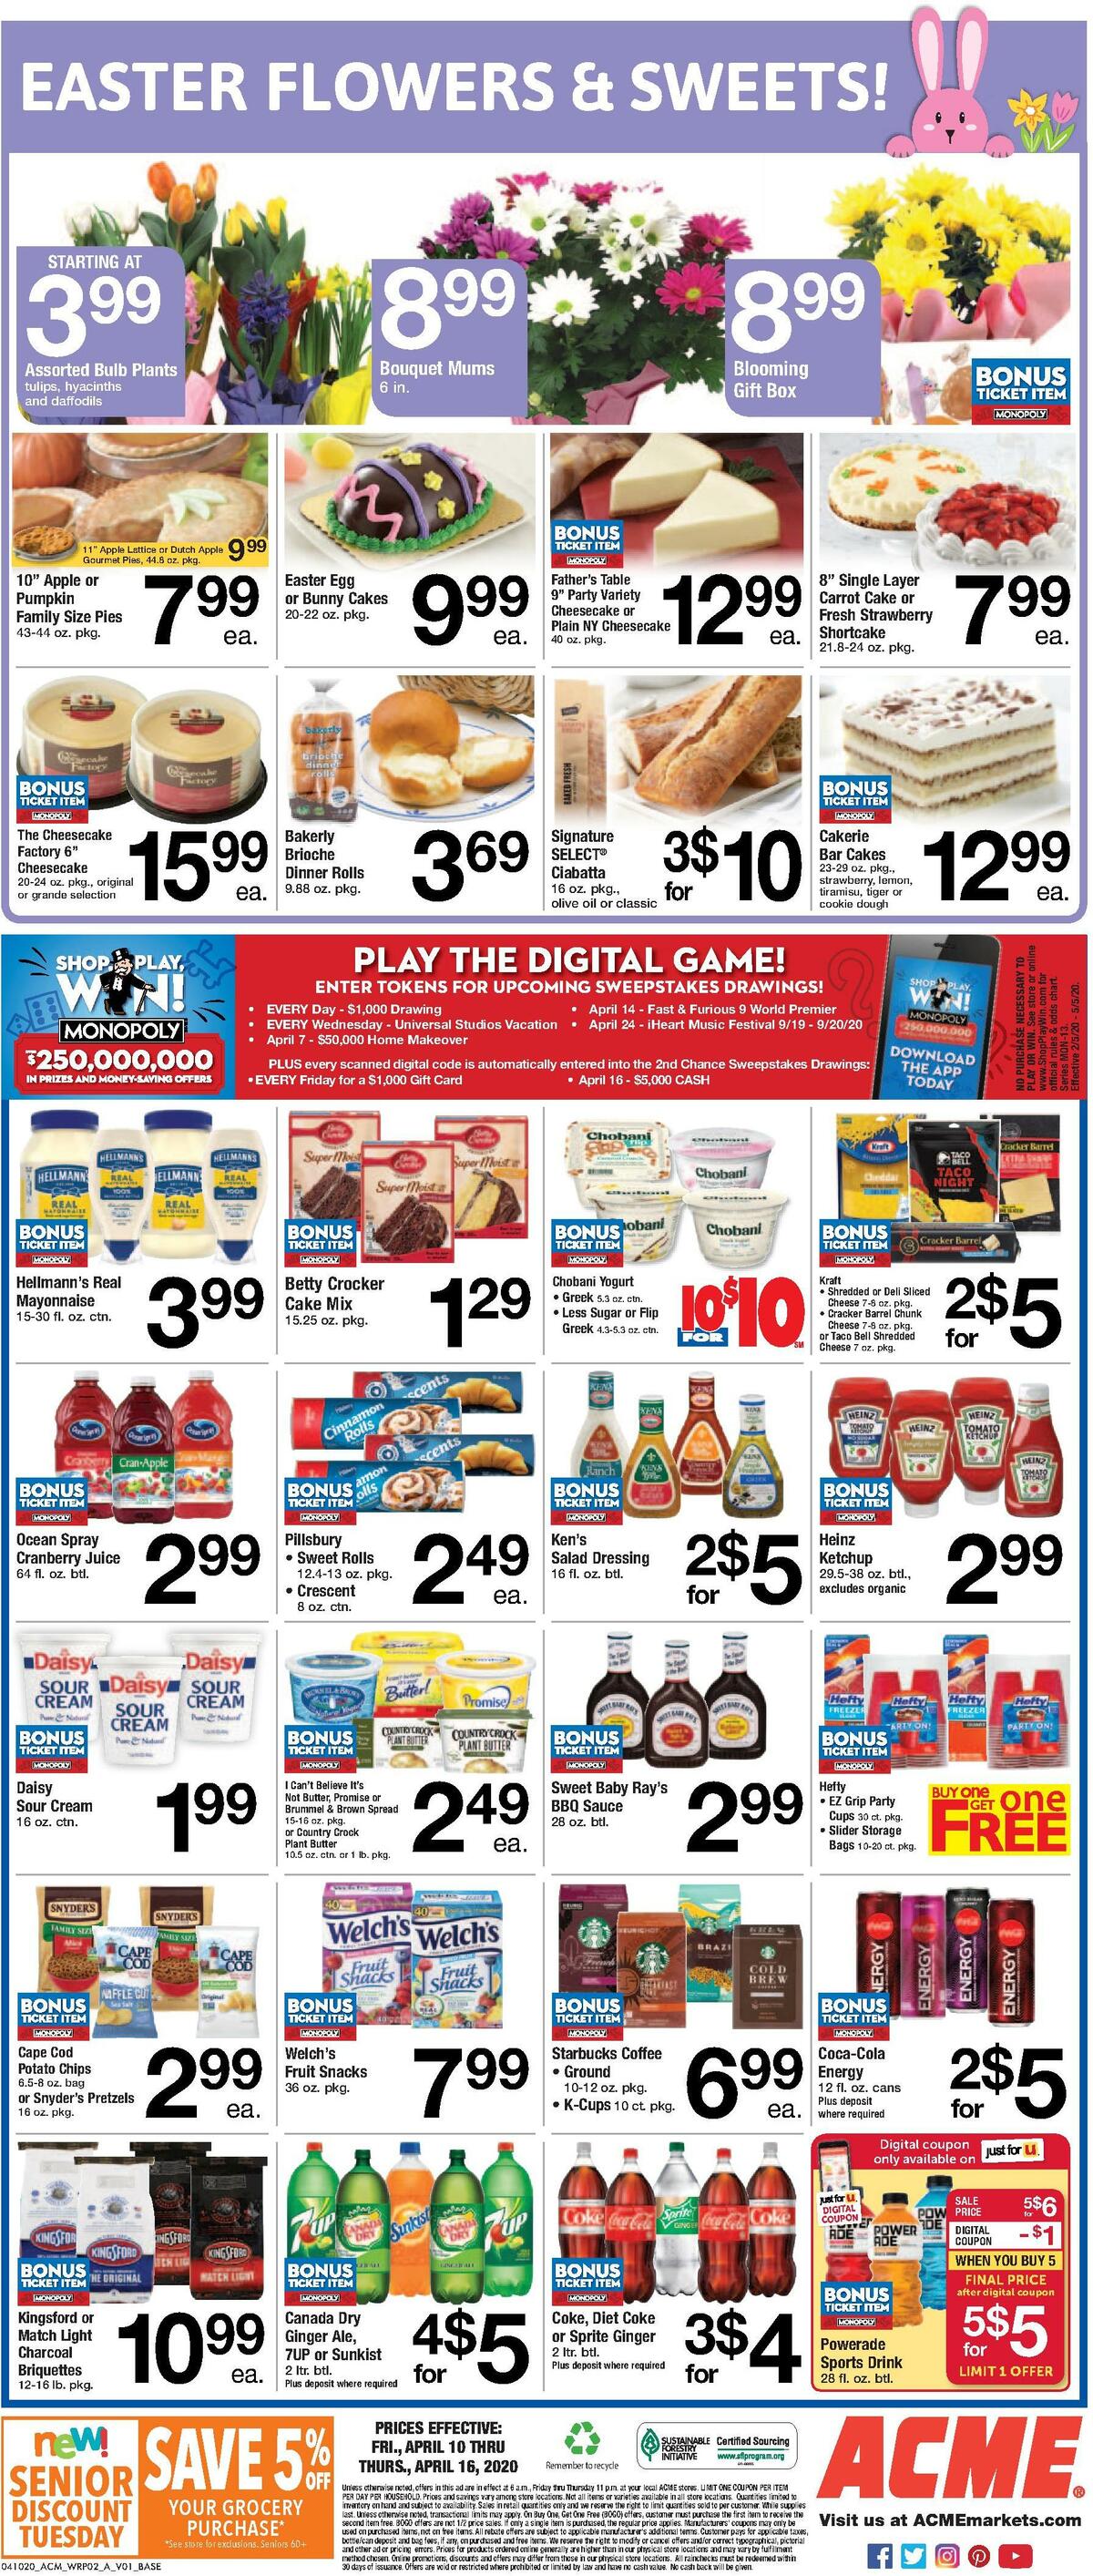 ACME Markets Weekly Ad from April 10